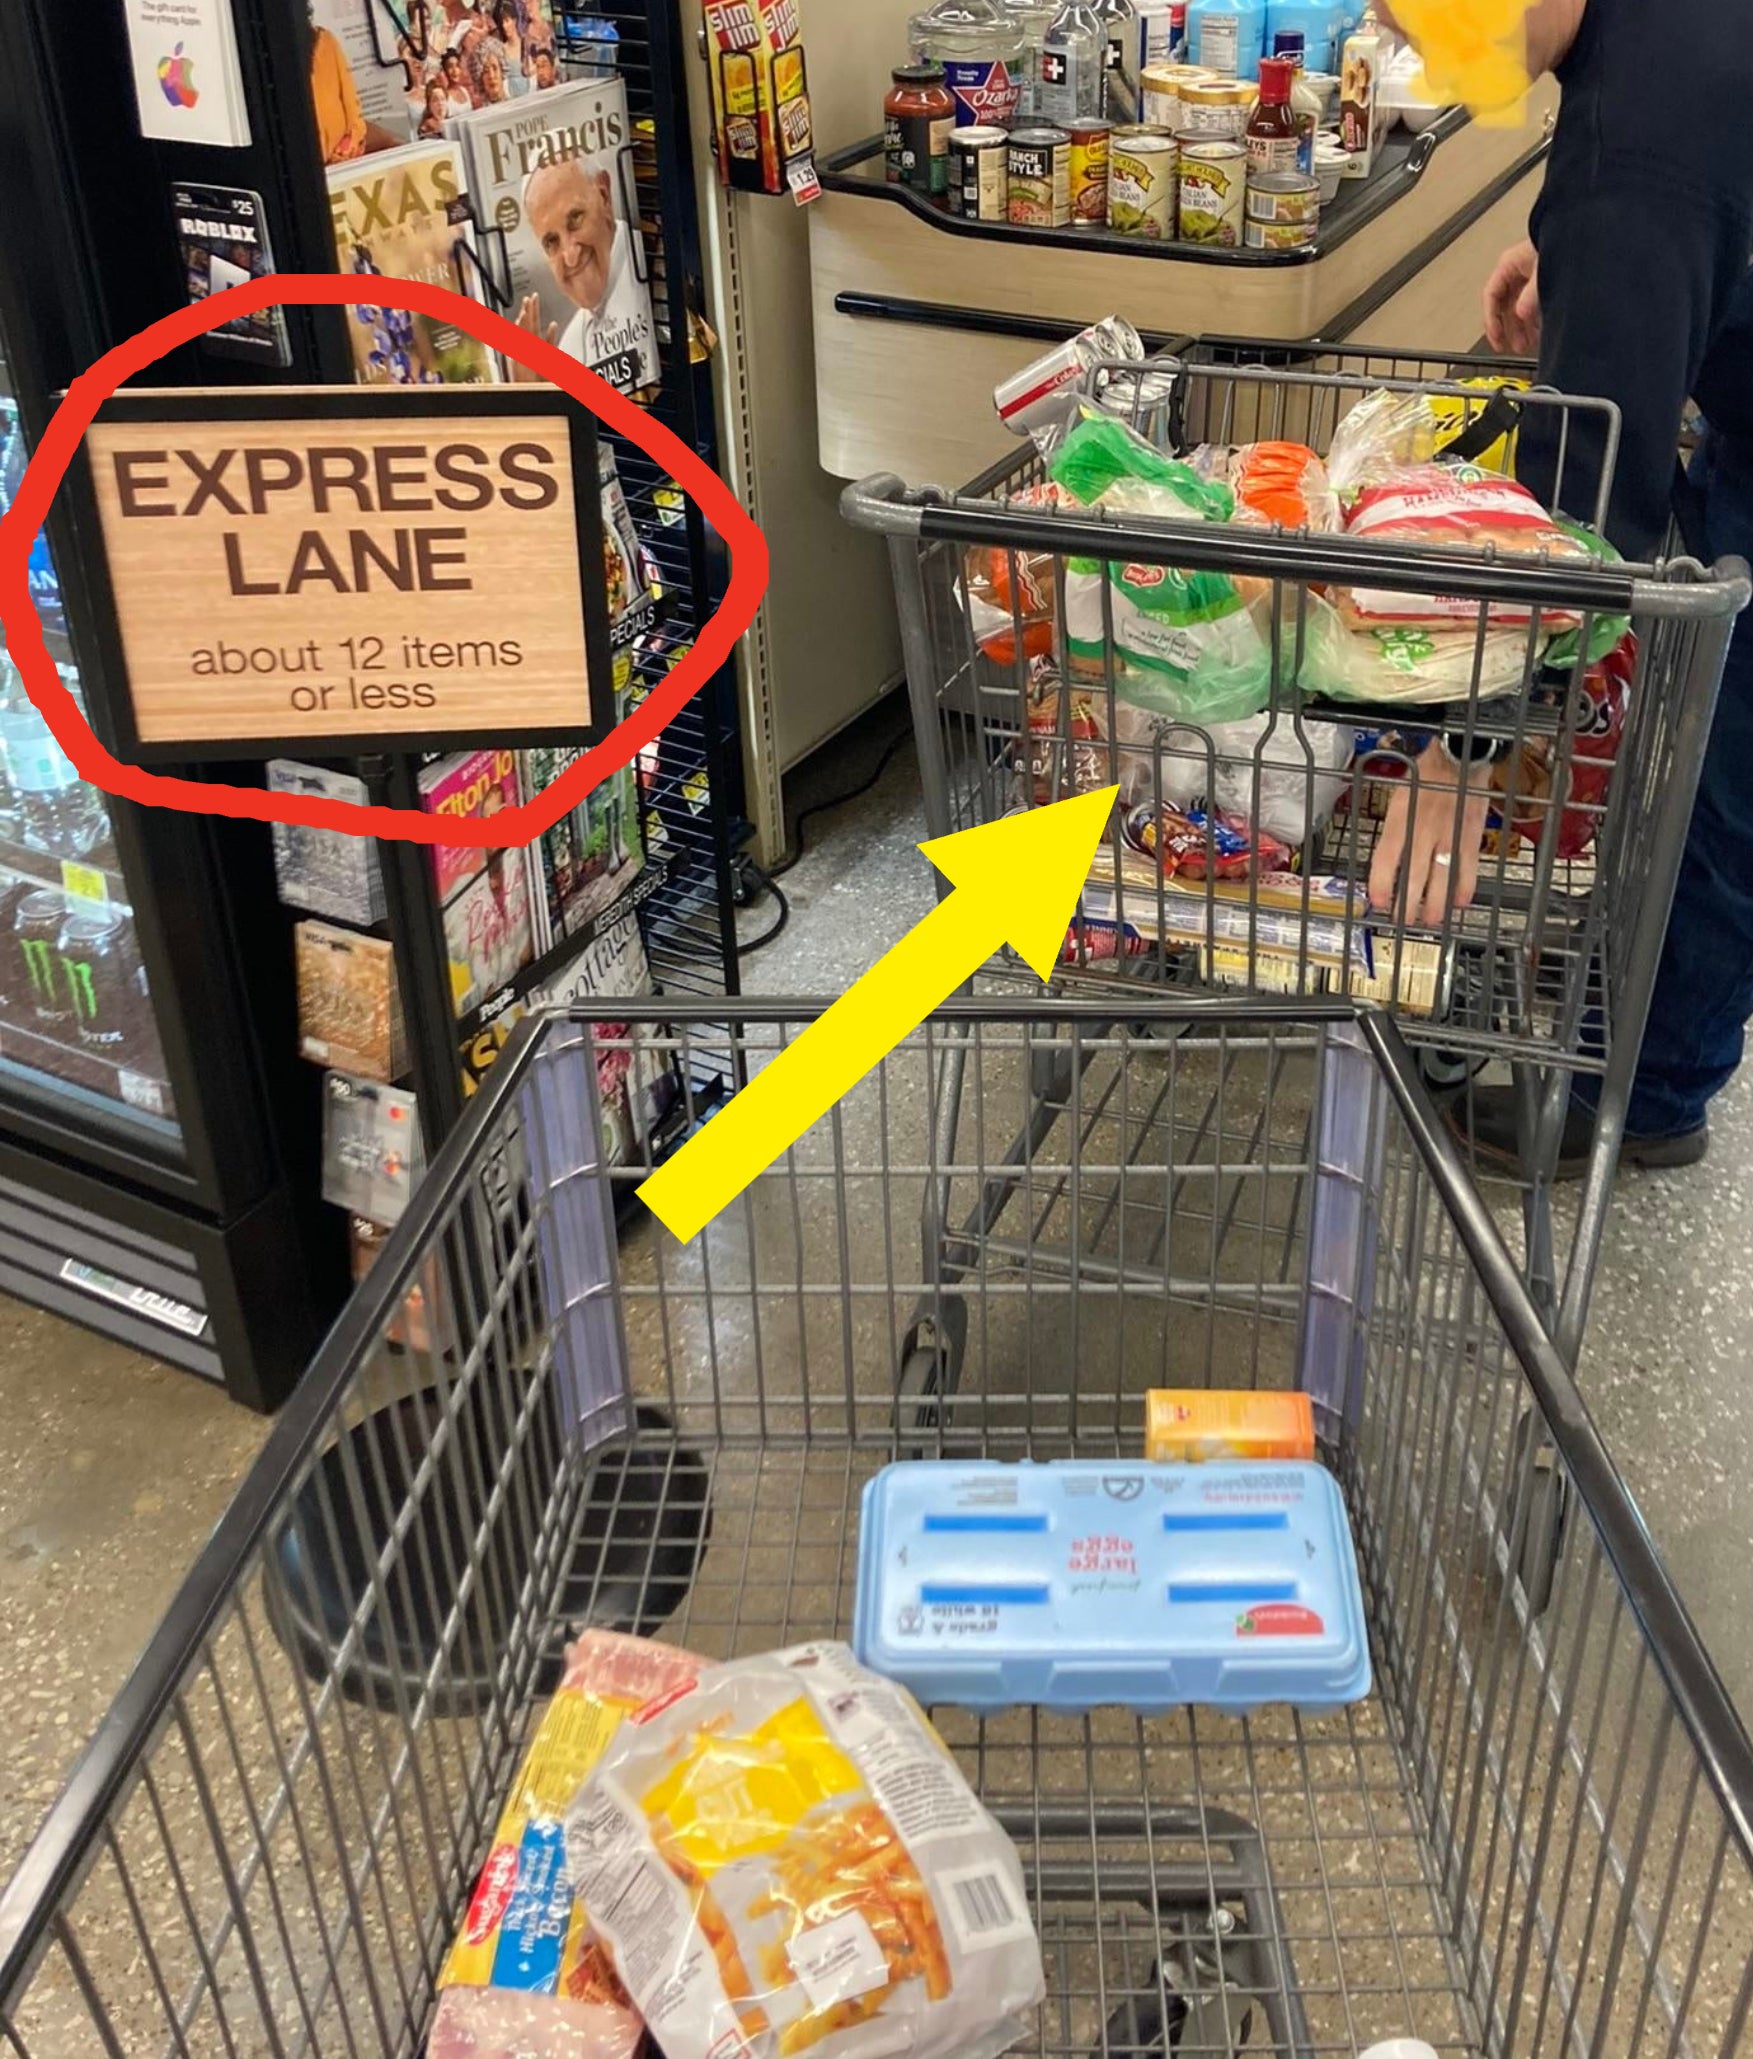 A grocery store express lane with &quot;about 12 items or less&quot; sign. Person checking out with a full cart